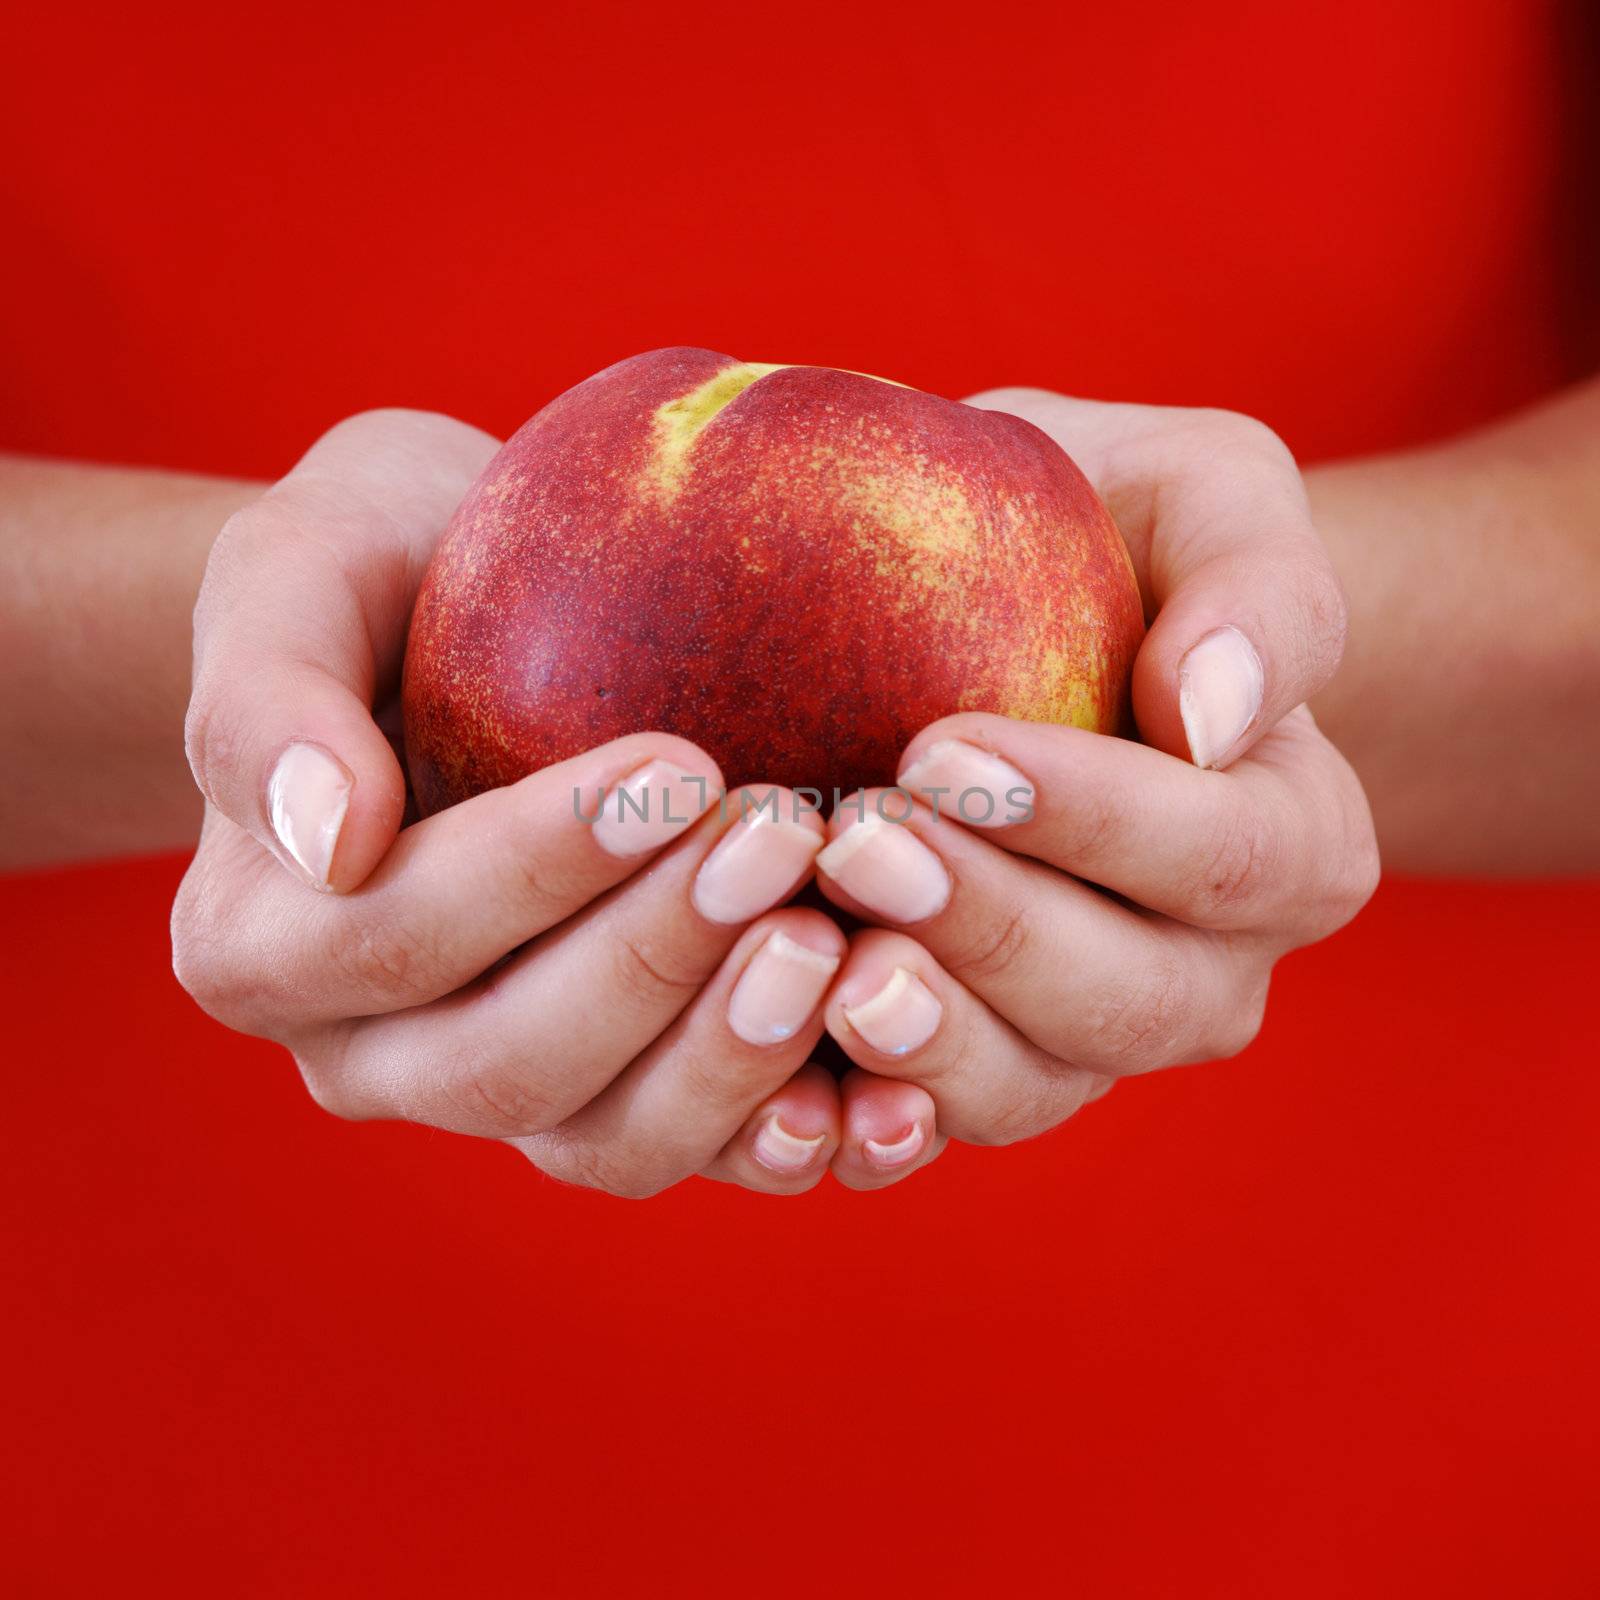 peach in woman hands close up